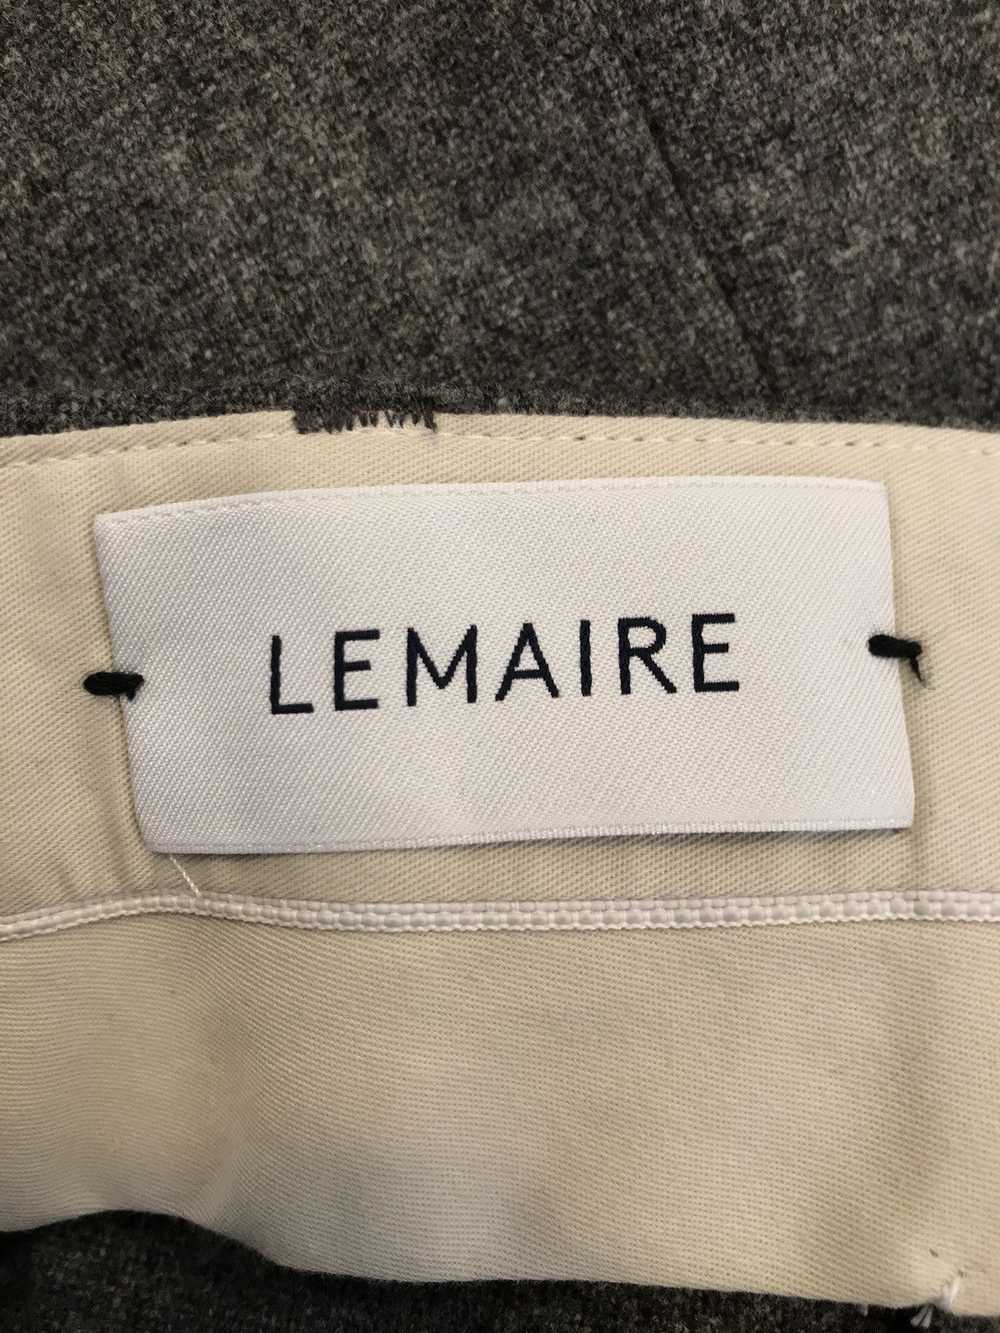 Lemaire Lemaire Tailored Trousers / Suit Pants - image 7